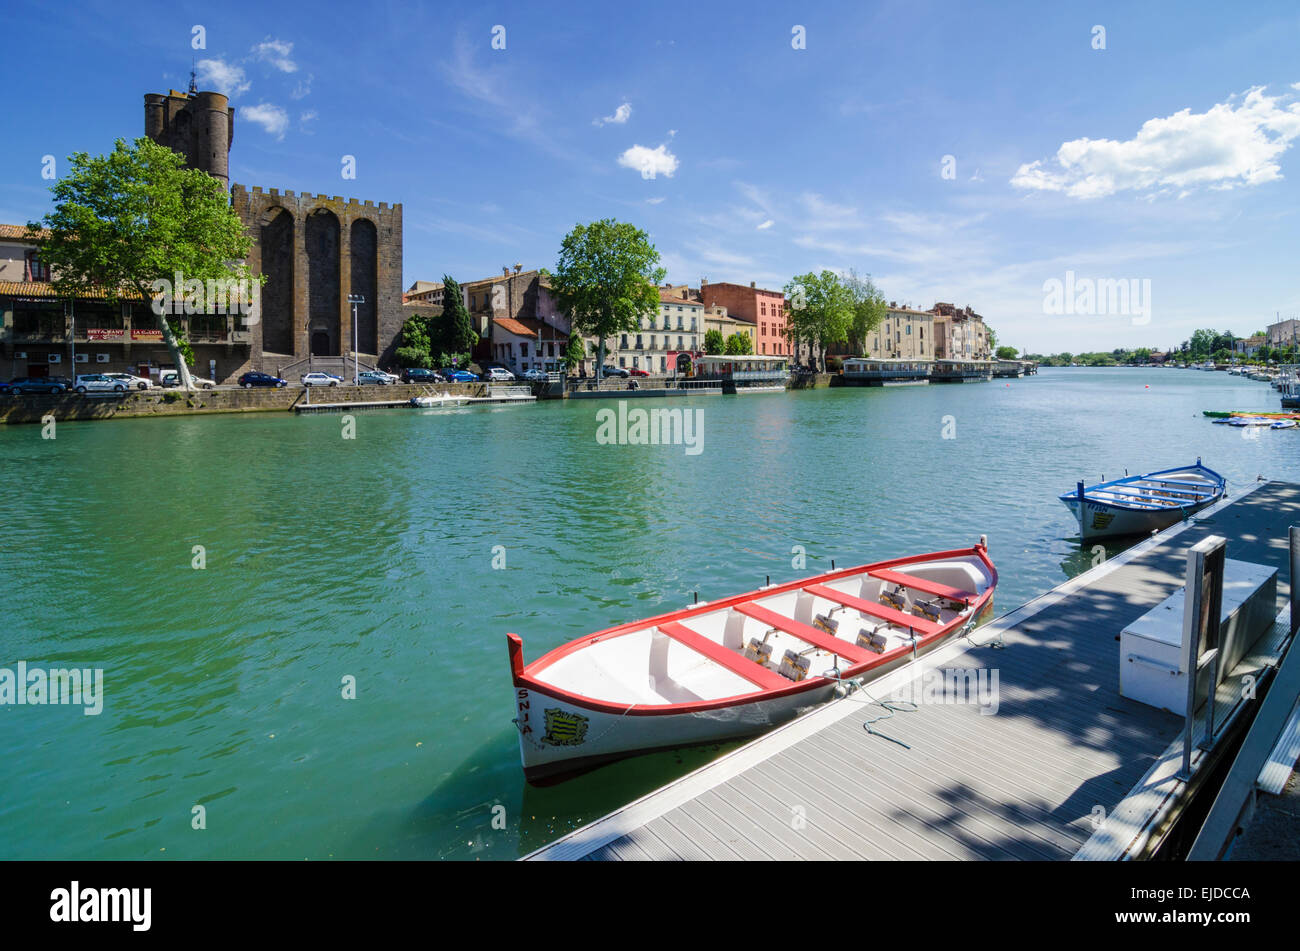 A small boat moored on the Herault River overlooked by Agde Cathedral in the town of Agde, Herault, Languedoc-Roussillon, France Stock Photo